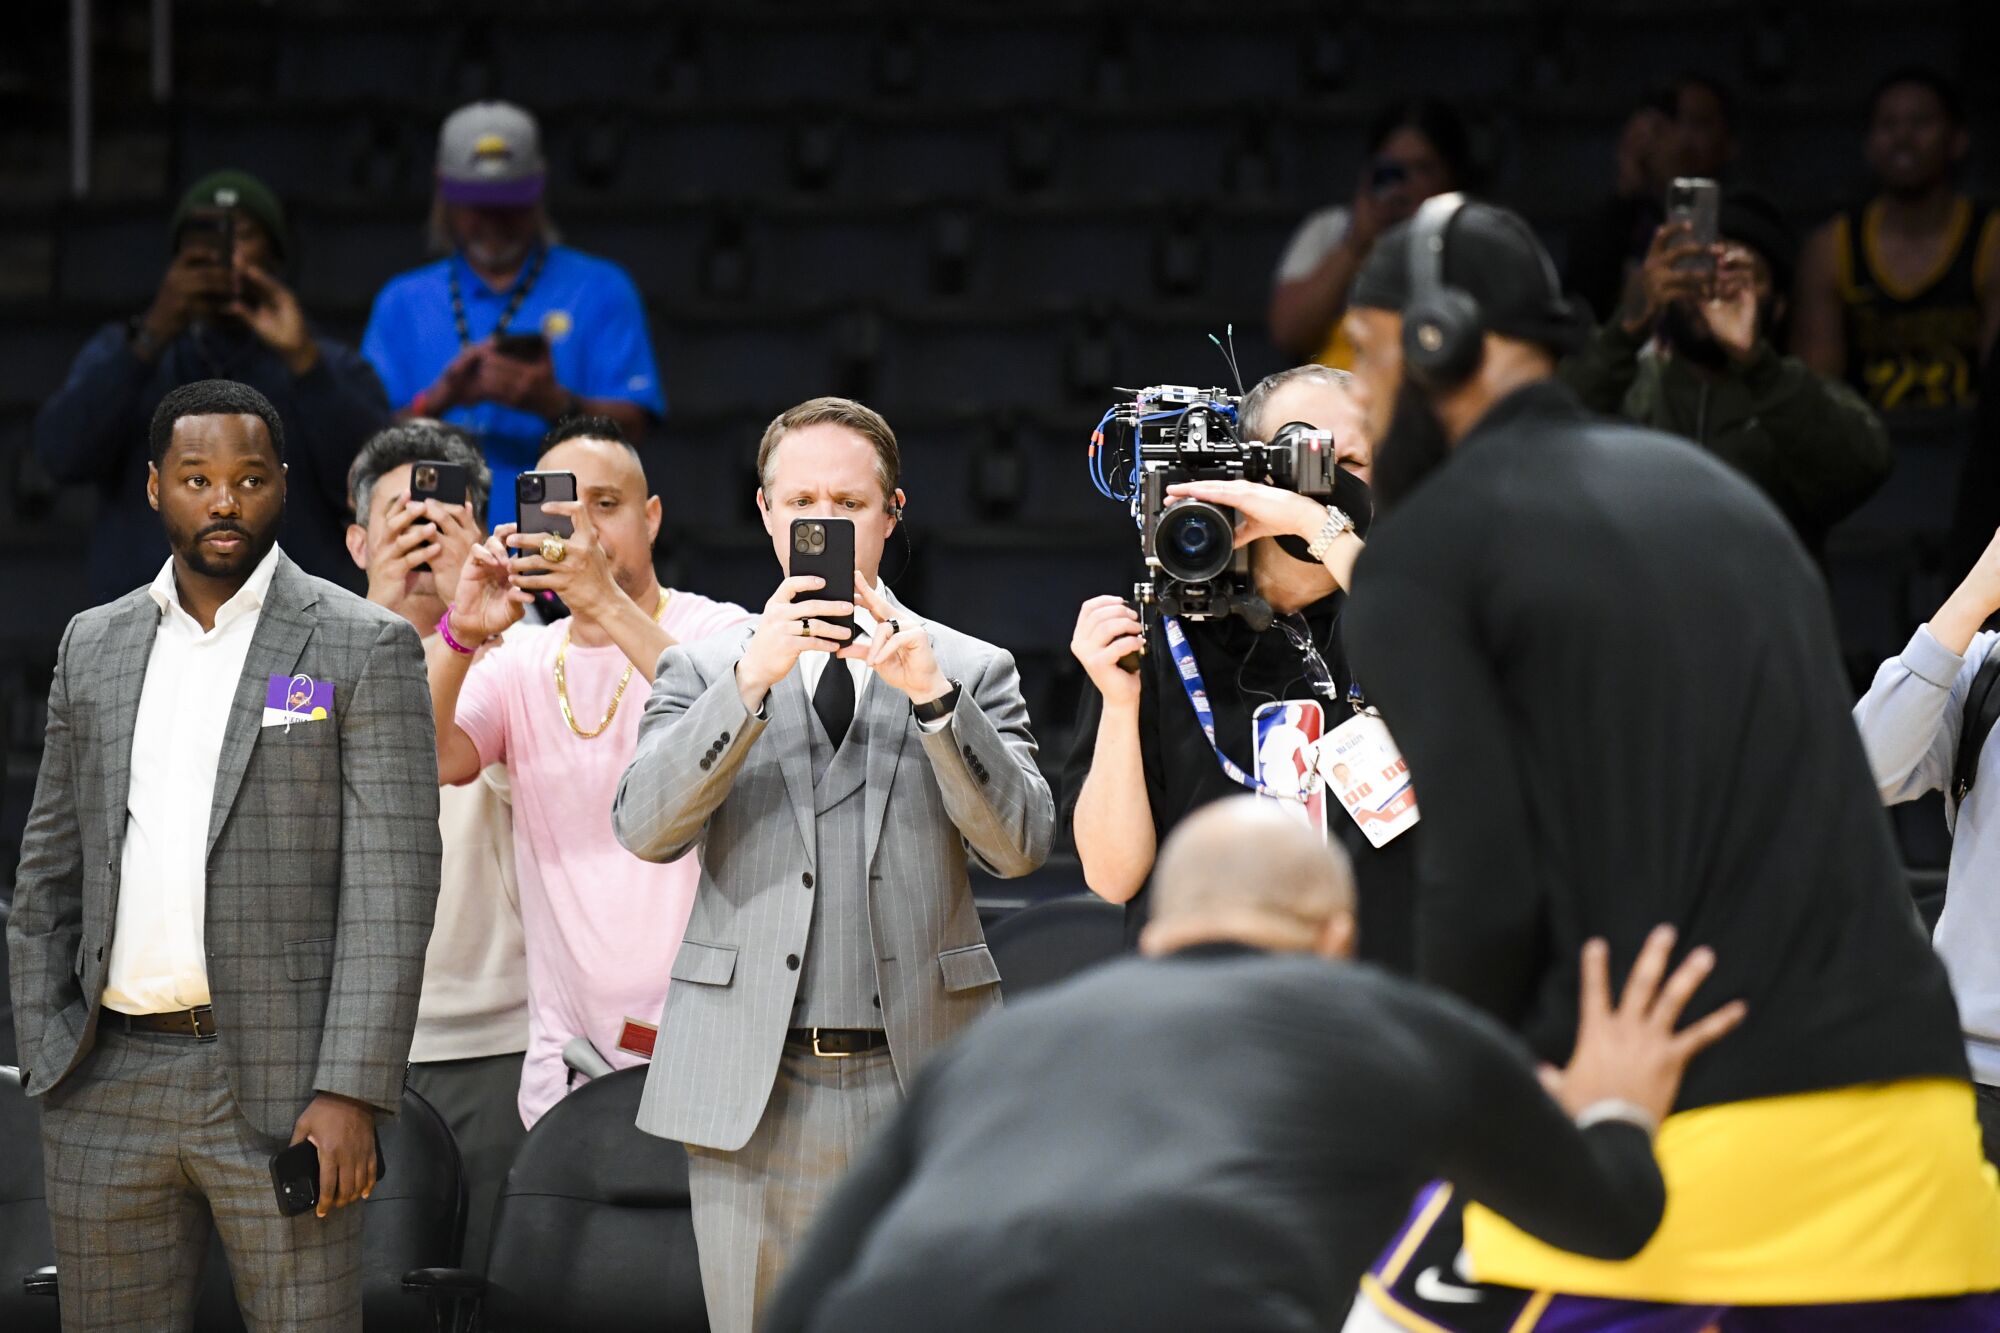 People watch and record on their phones as Lakers forward LeBron James warms up.